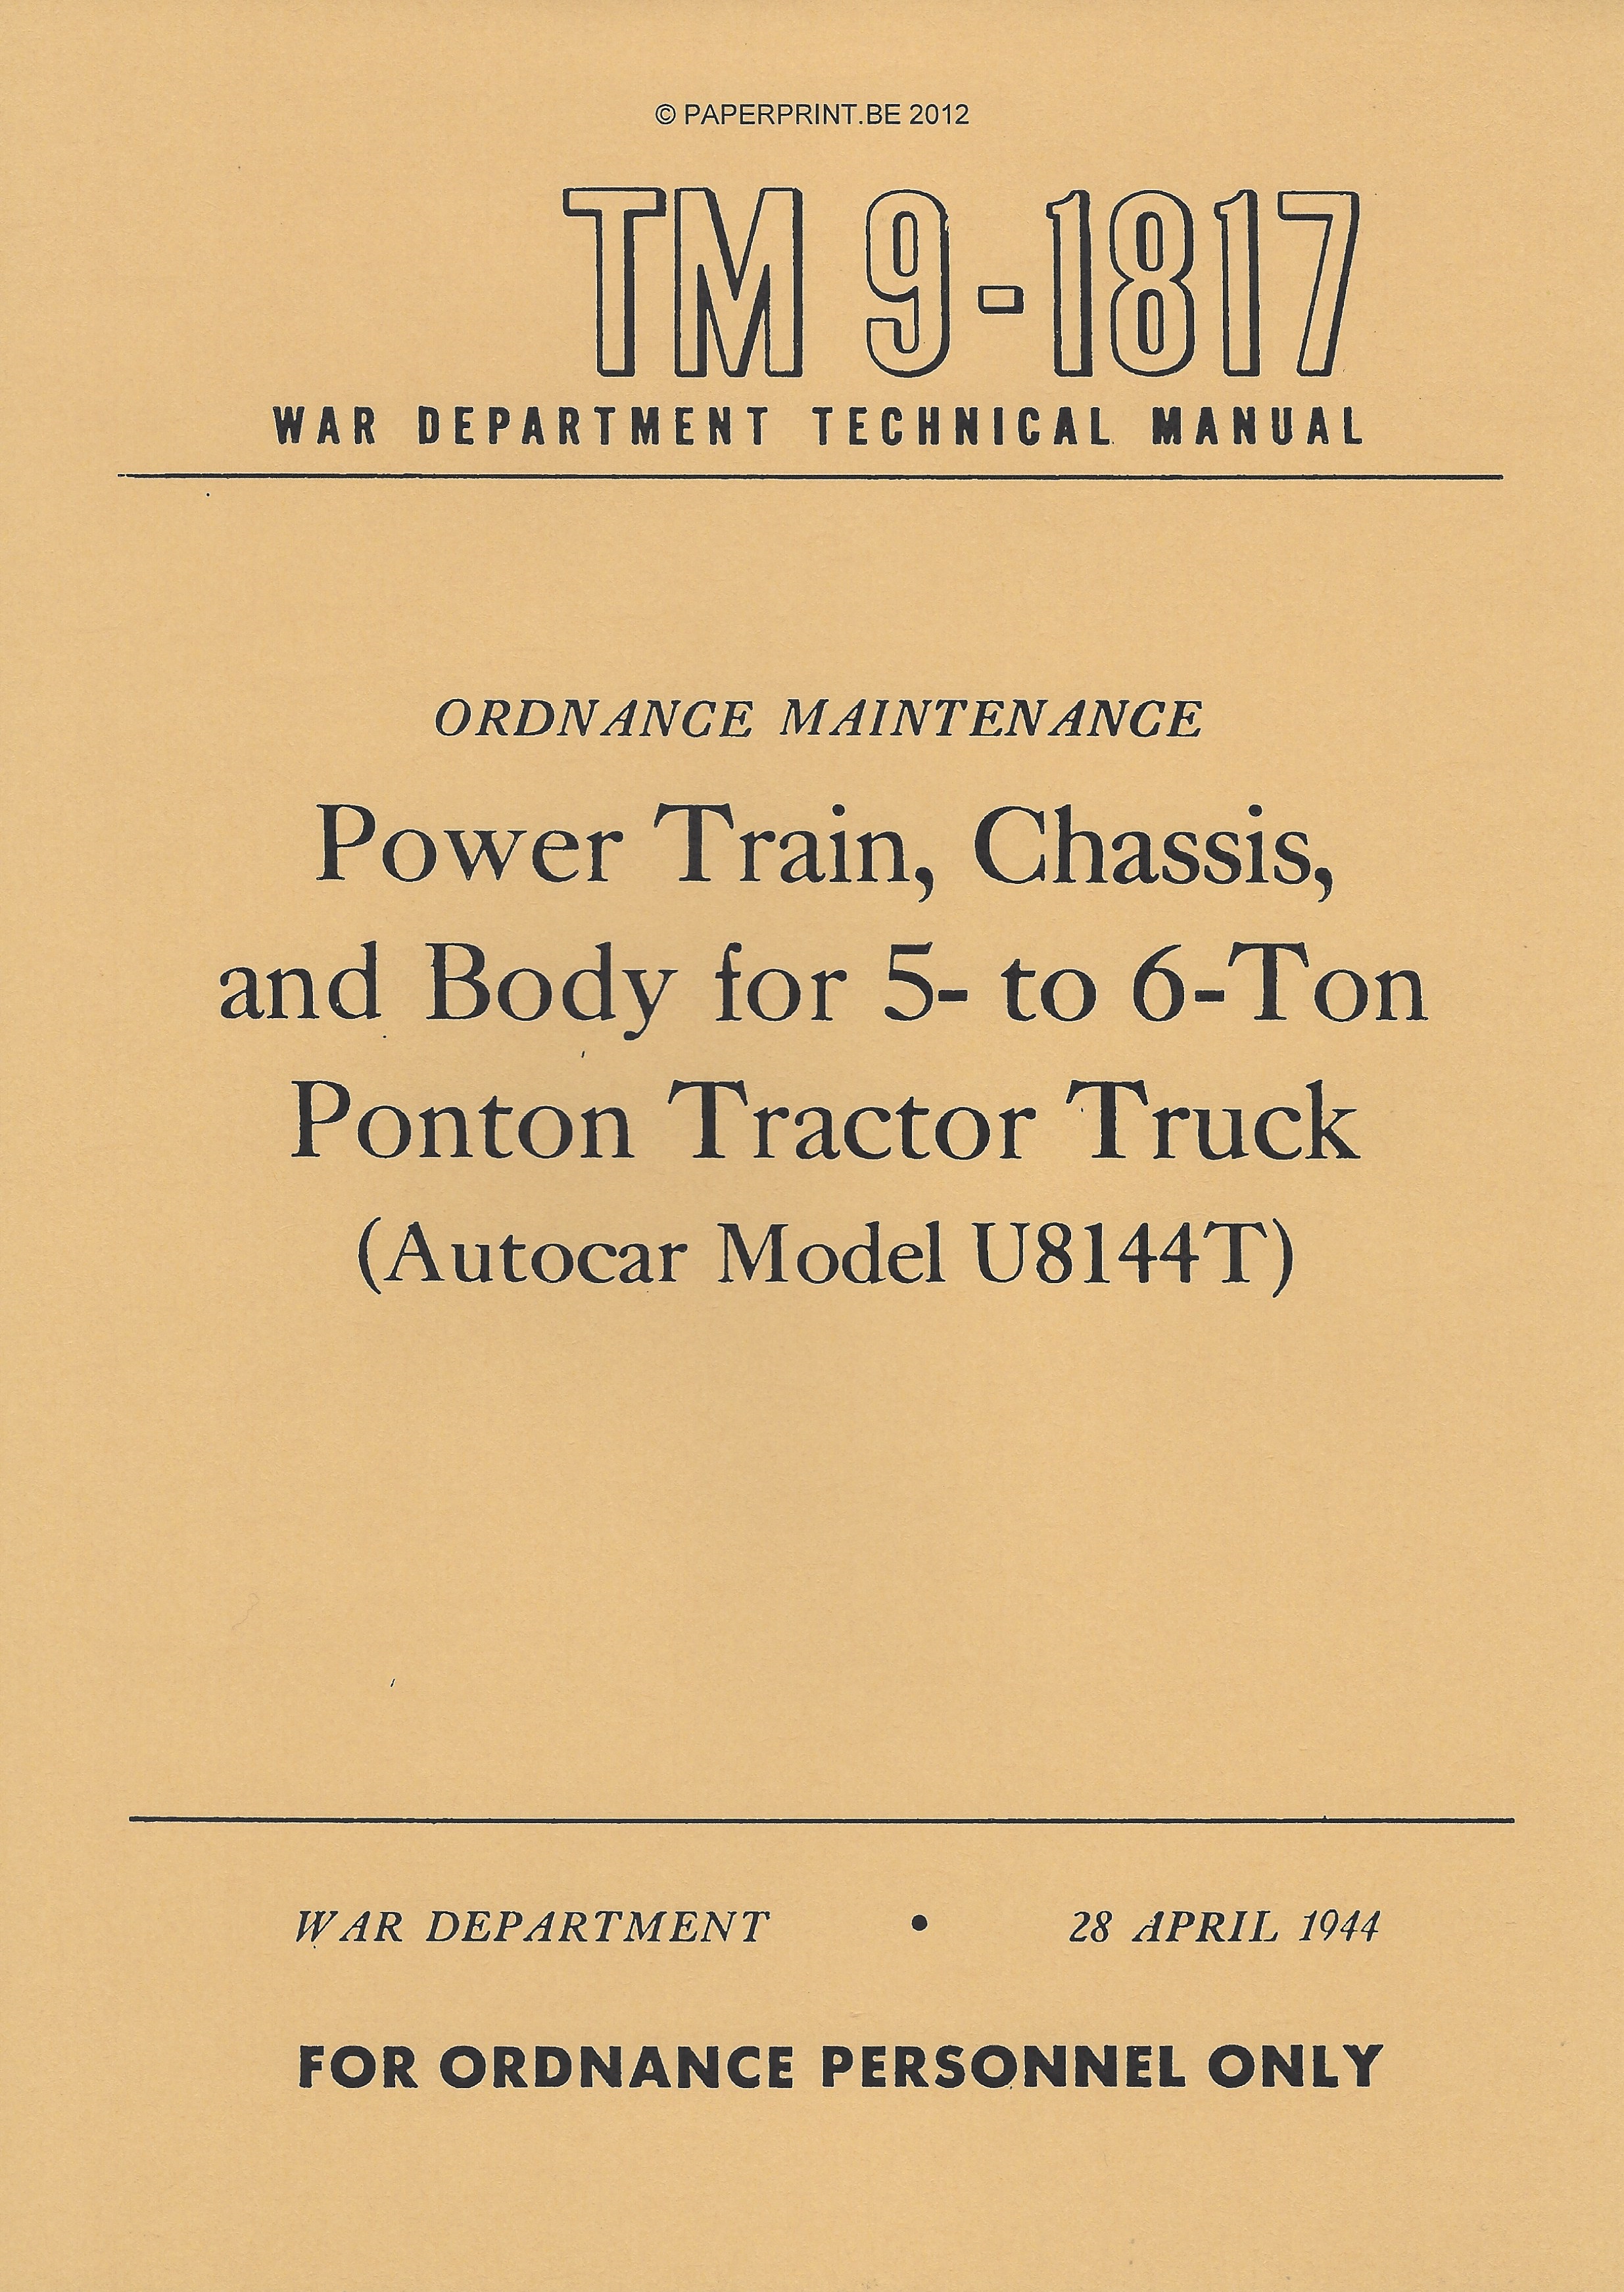 TM 9-1817 US POWER TRAIN, CHASSIS, AND BODY FOR 5- TO 6-TON PONTON TRACTOR TRUCK (AUTOCAR MODEL U8144T)